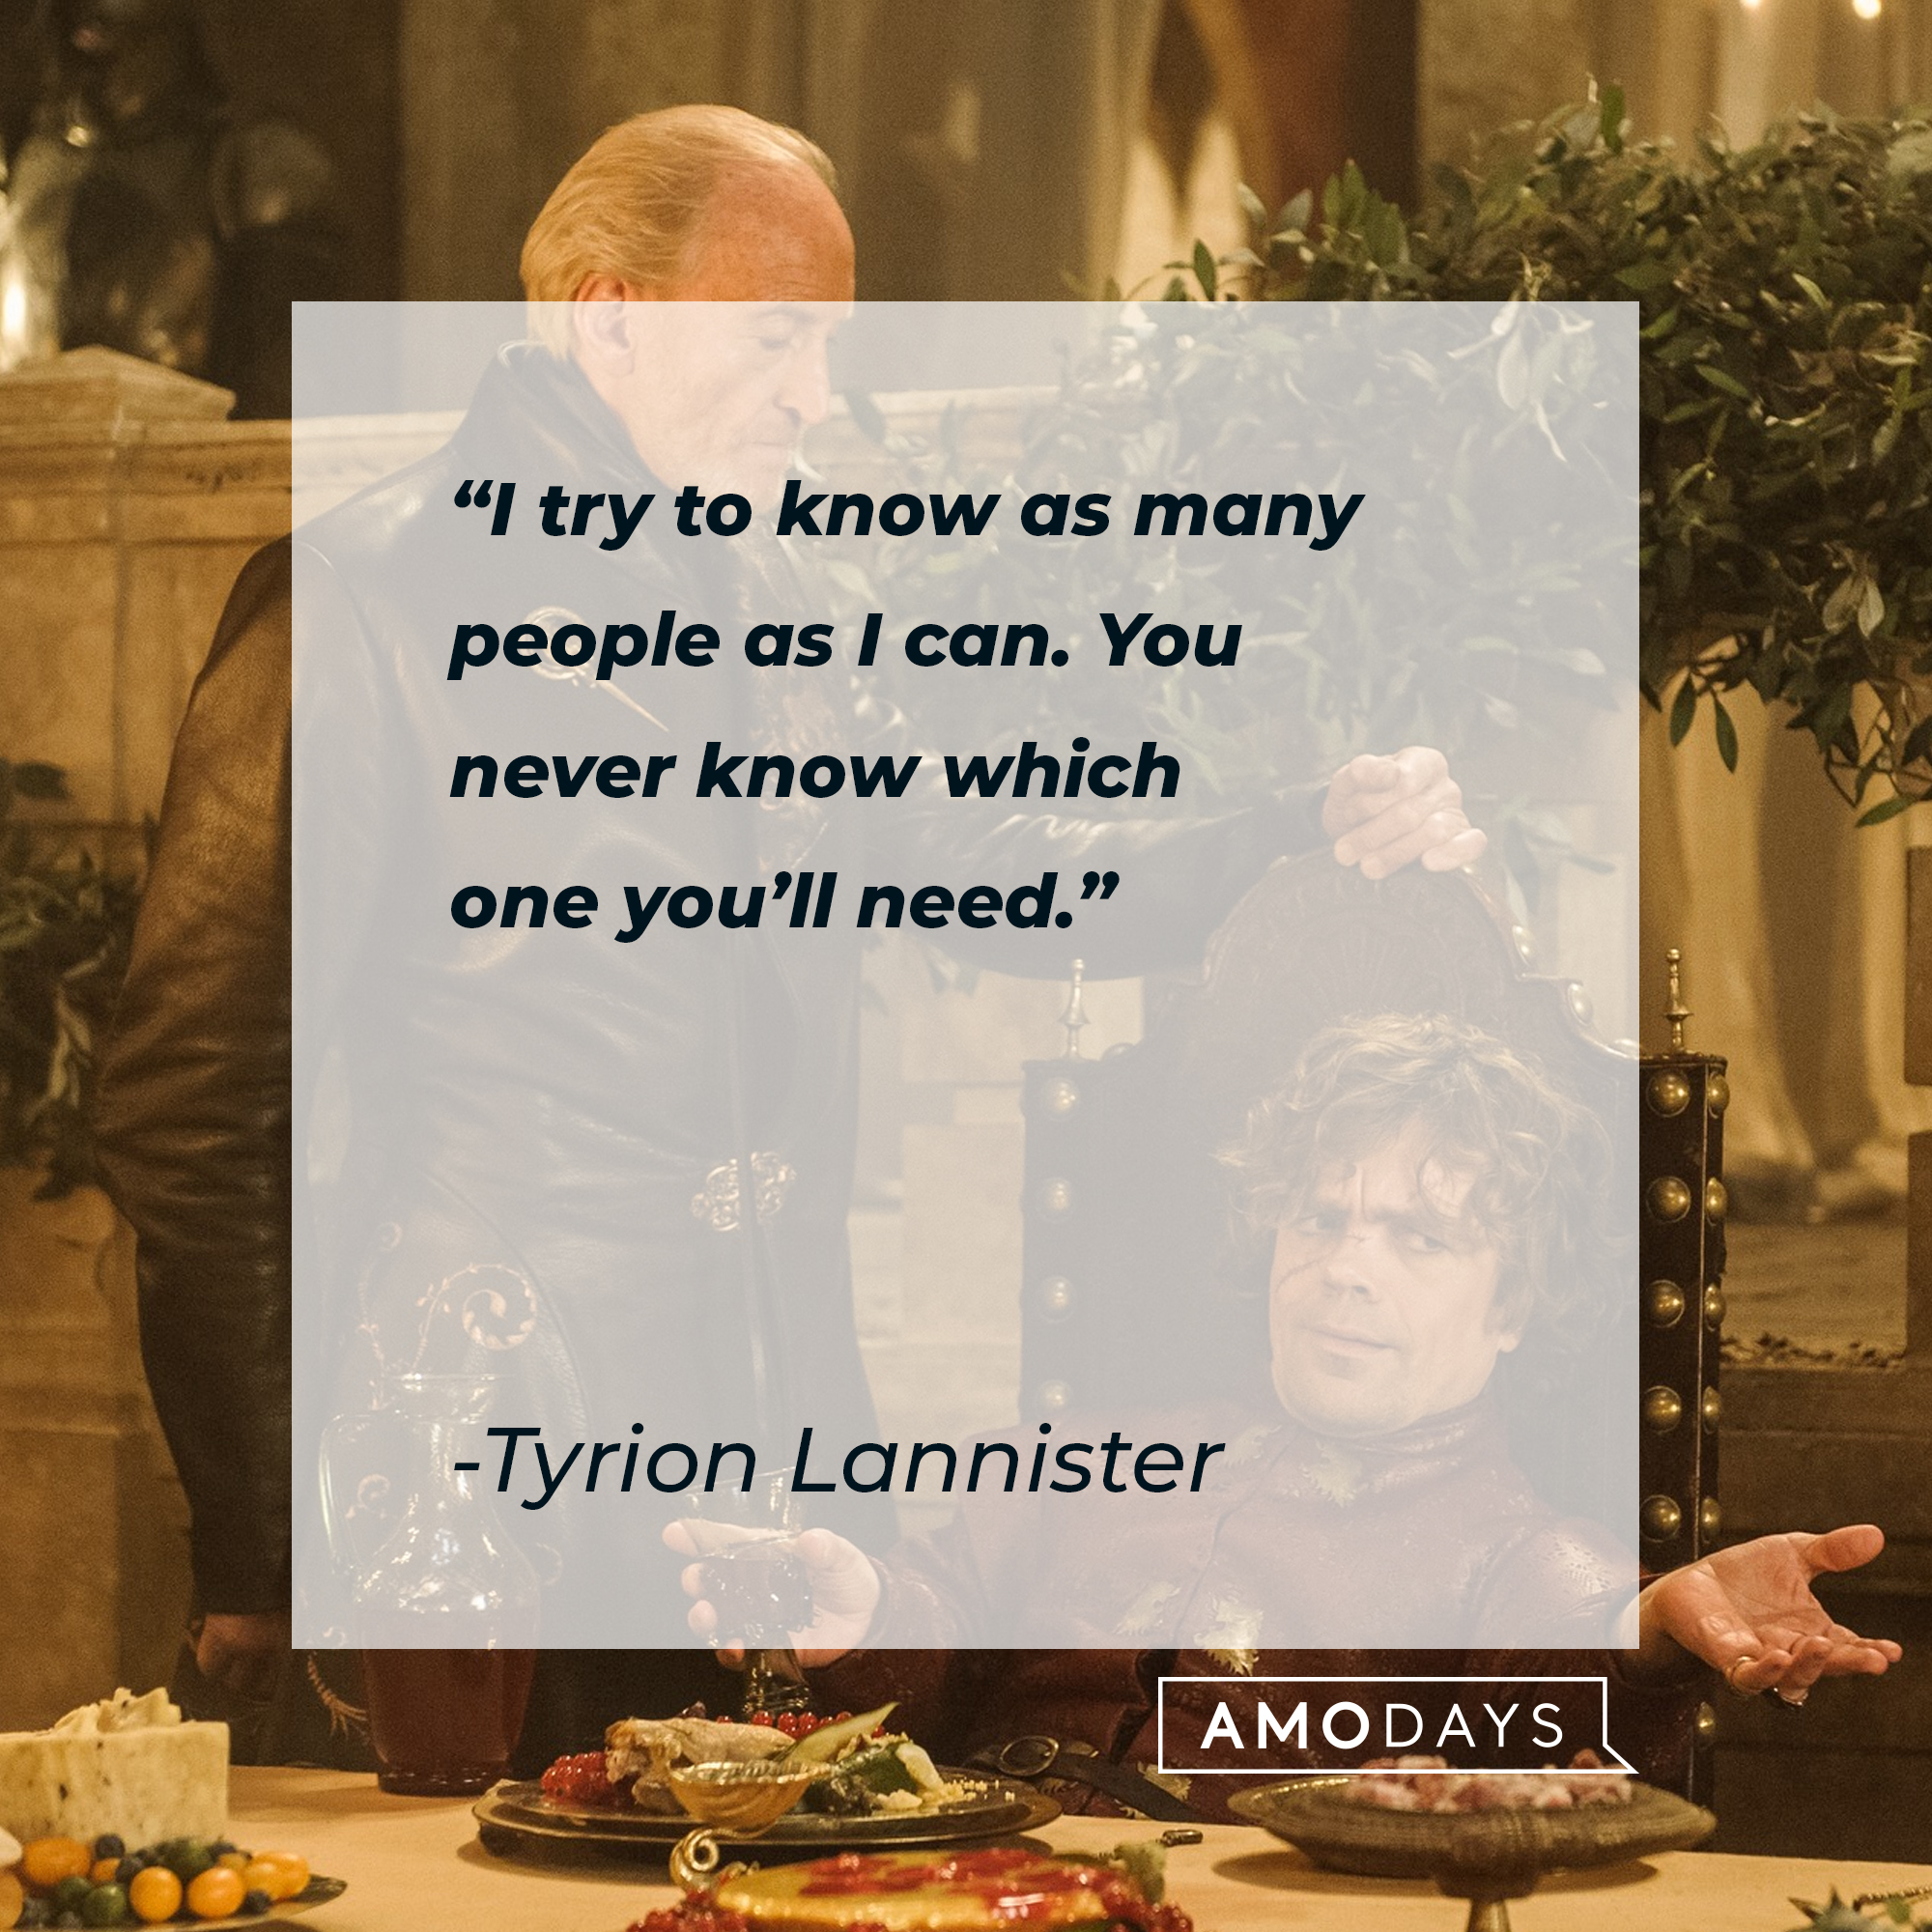 Tyrion Lannister's quote: “I try to know as many people as I can. You never know which one you’ll need.” | Source: facebook.com/GameOfThrones